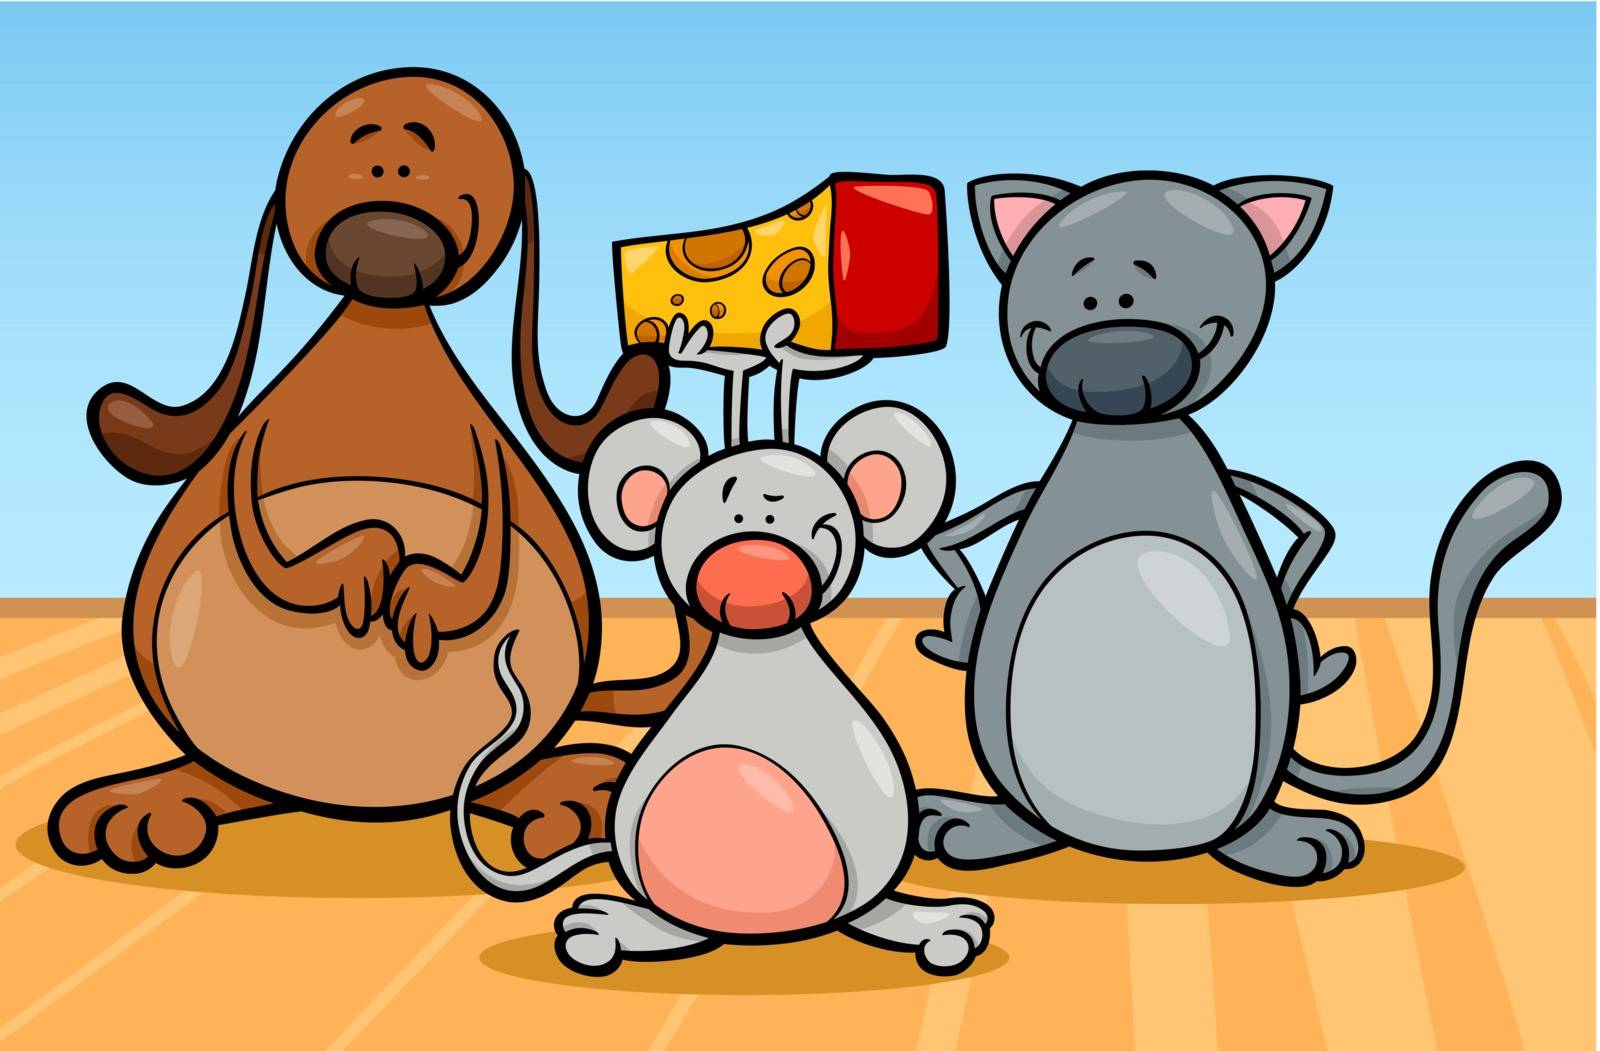 Cartoon Illustration of Cute Dog Cat and Mouse Pets Characters